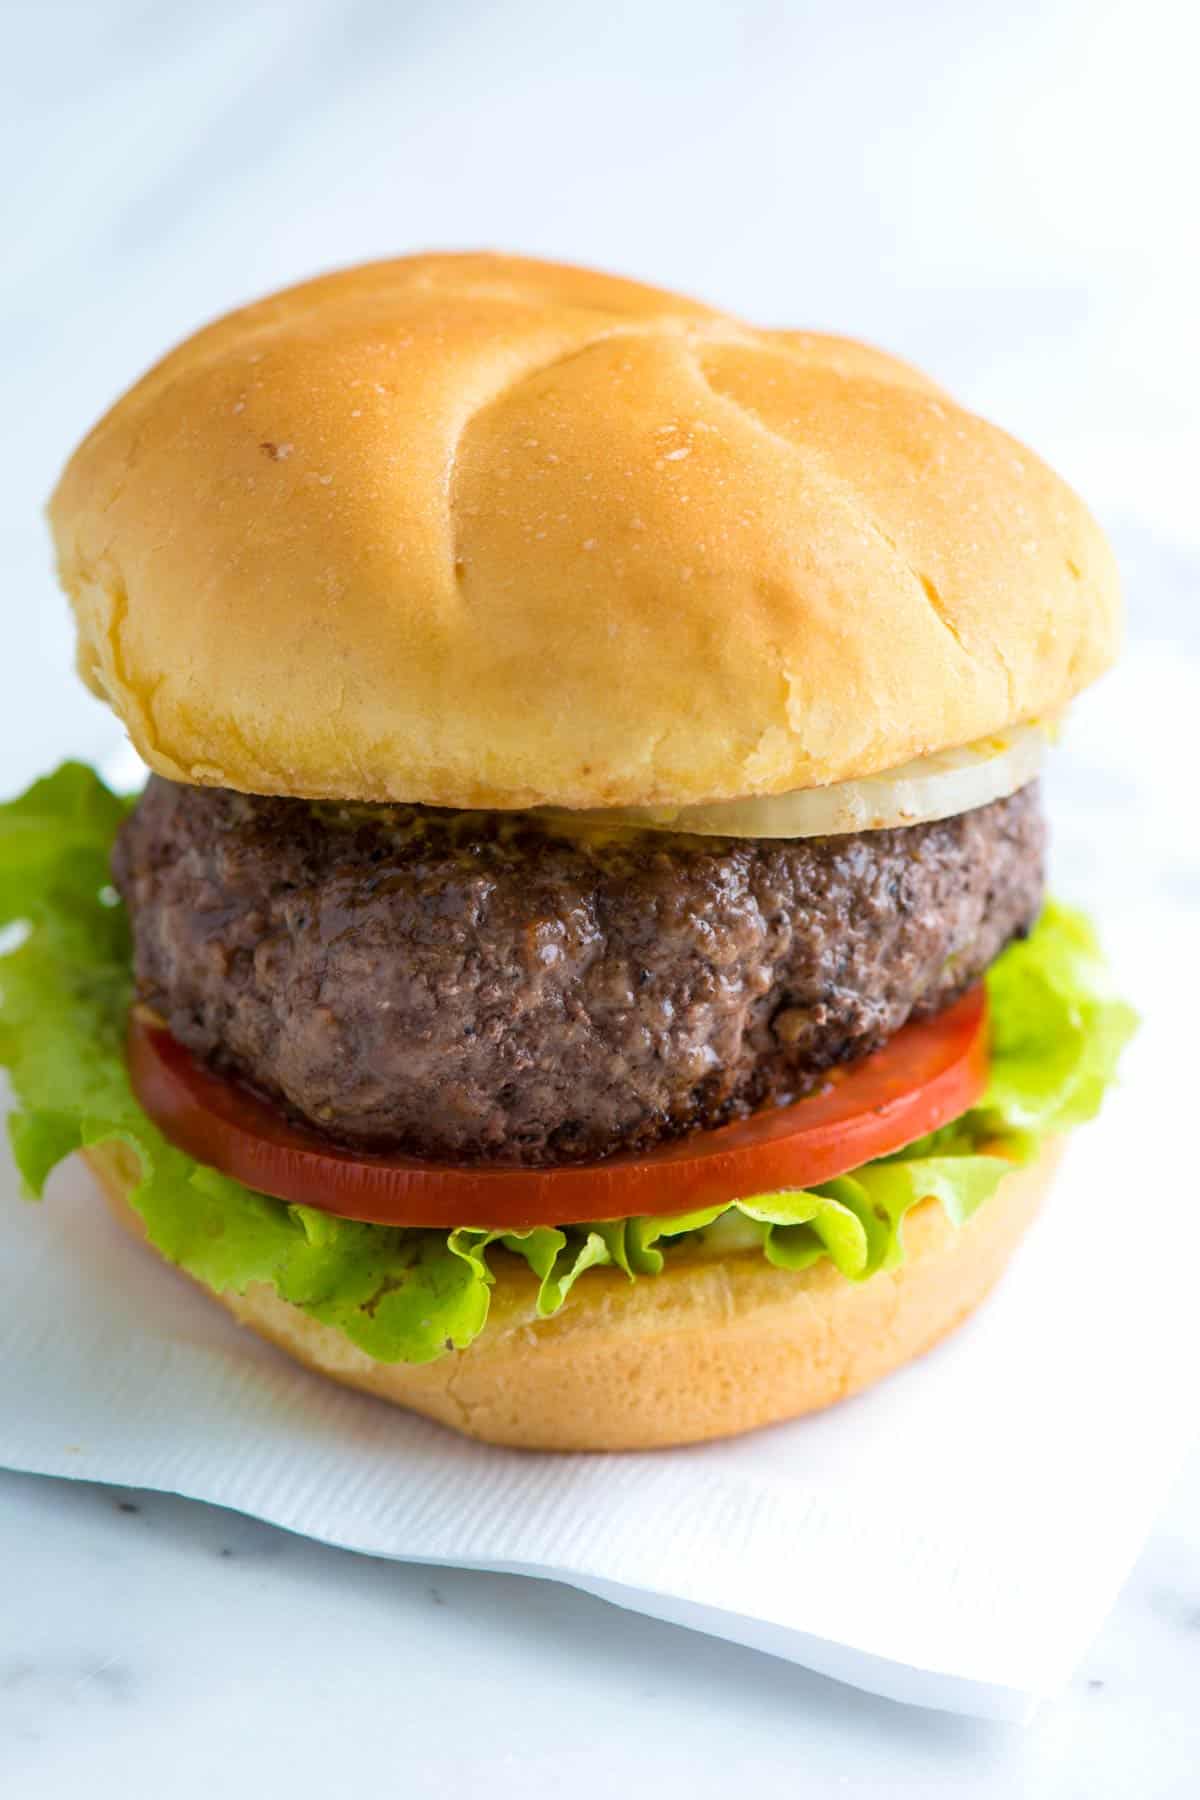 Is a plain burger (just buns and meat) healthier than one with